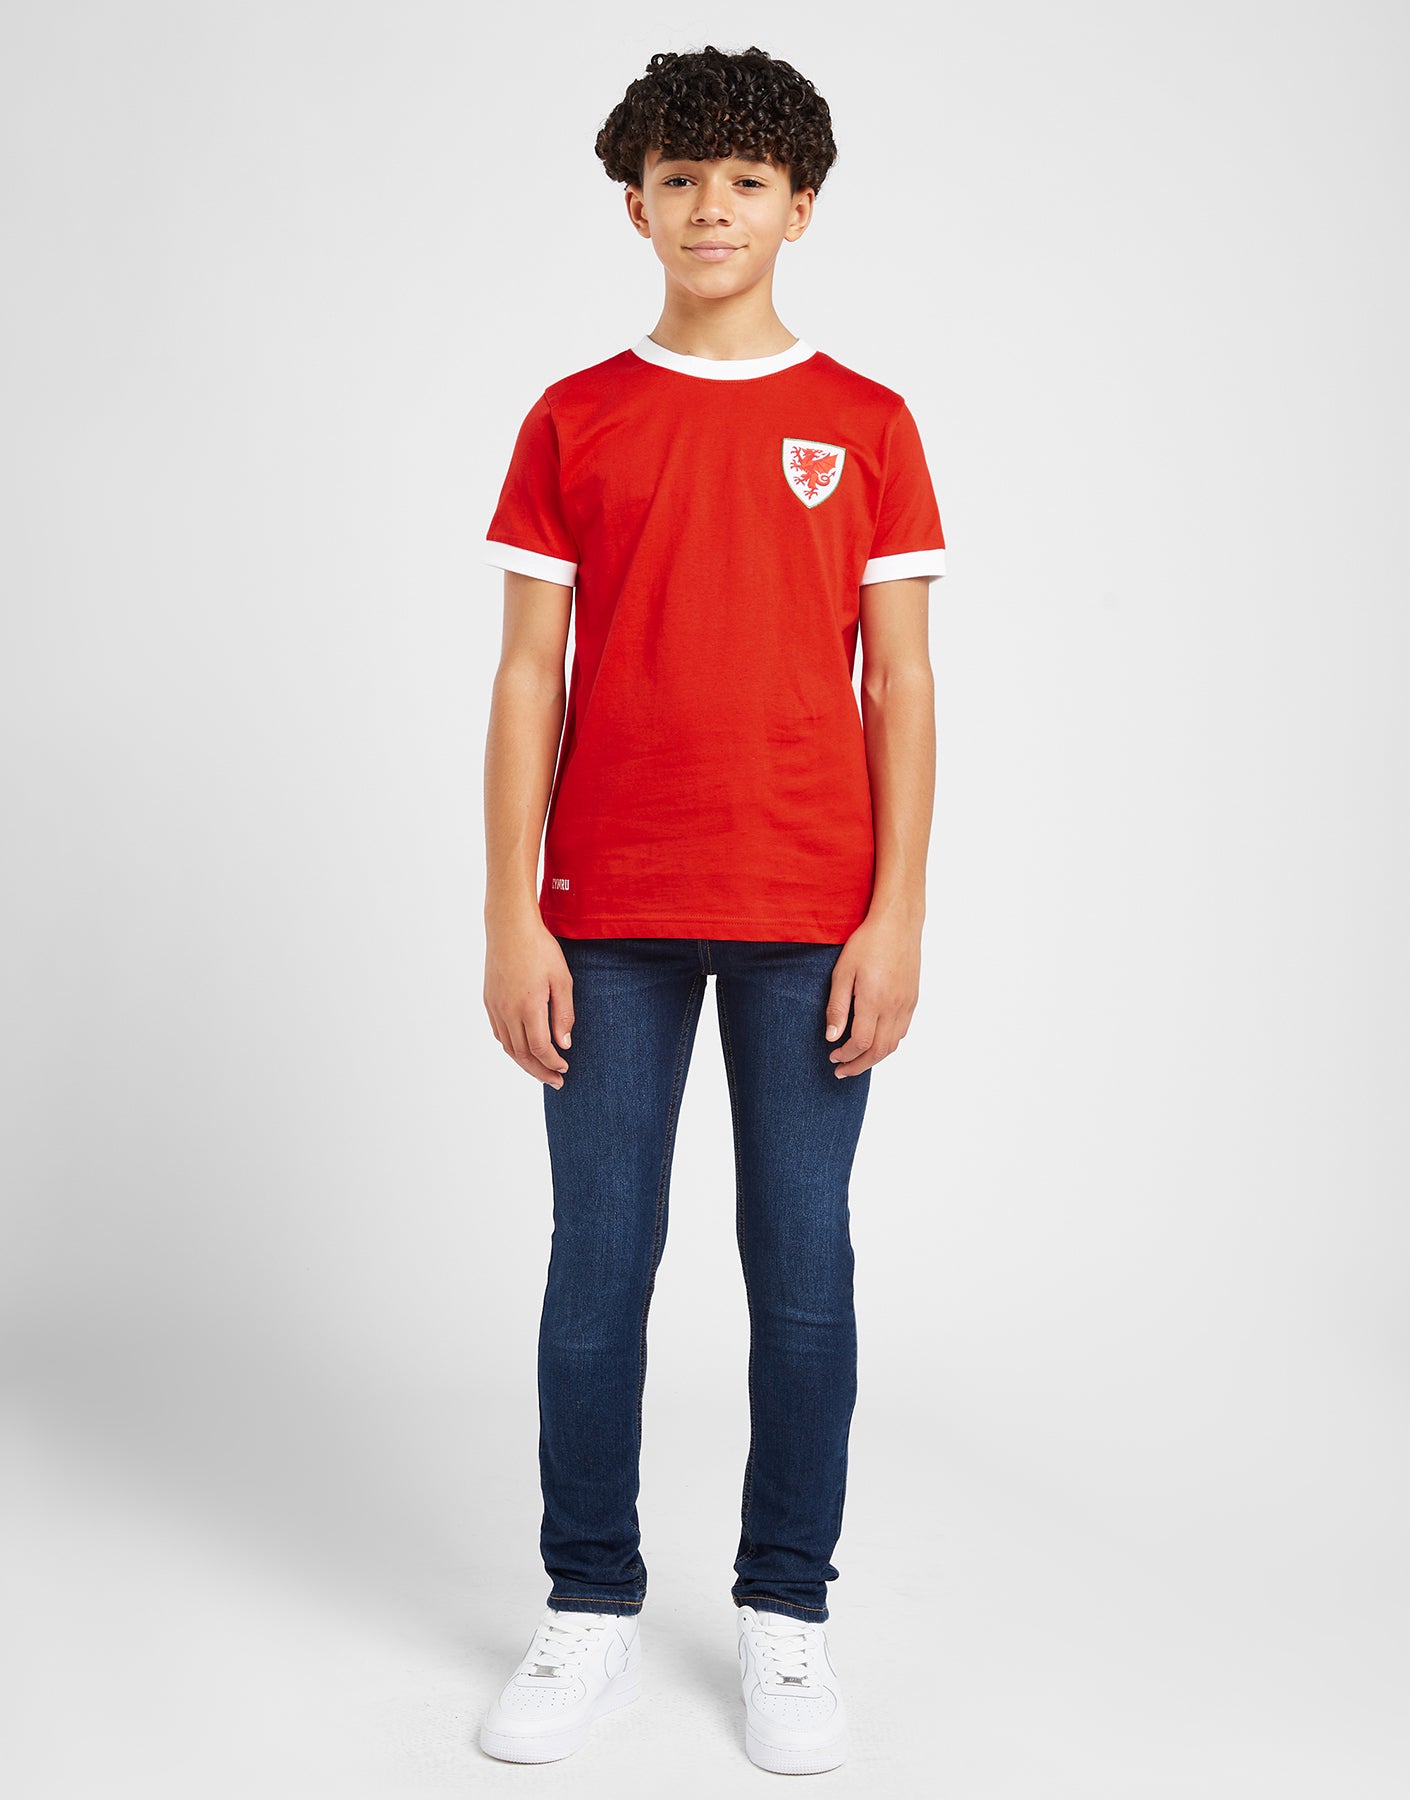 Official Team Wales Kids Ringer T-Shirt - Red - The World Football Store